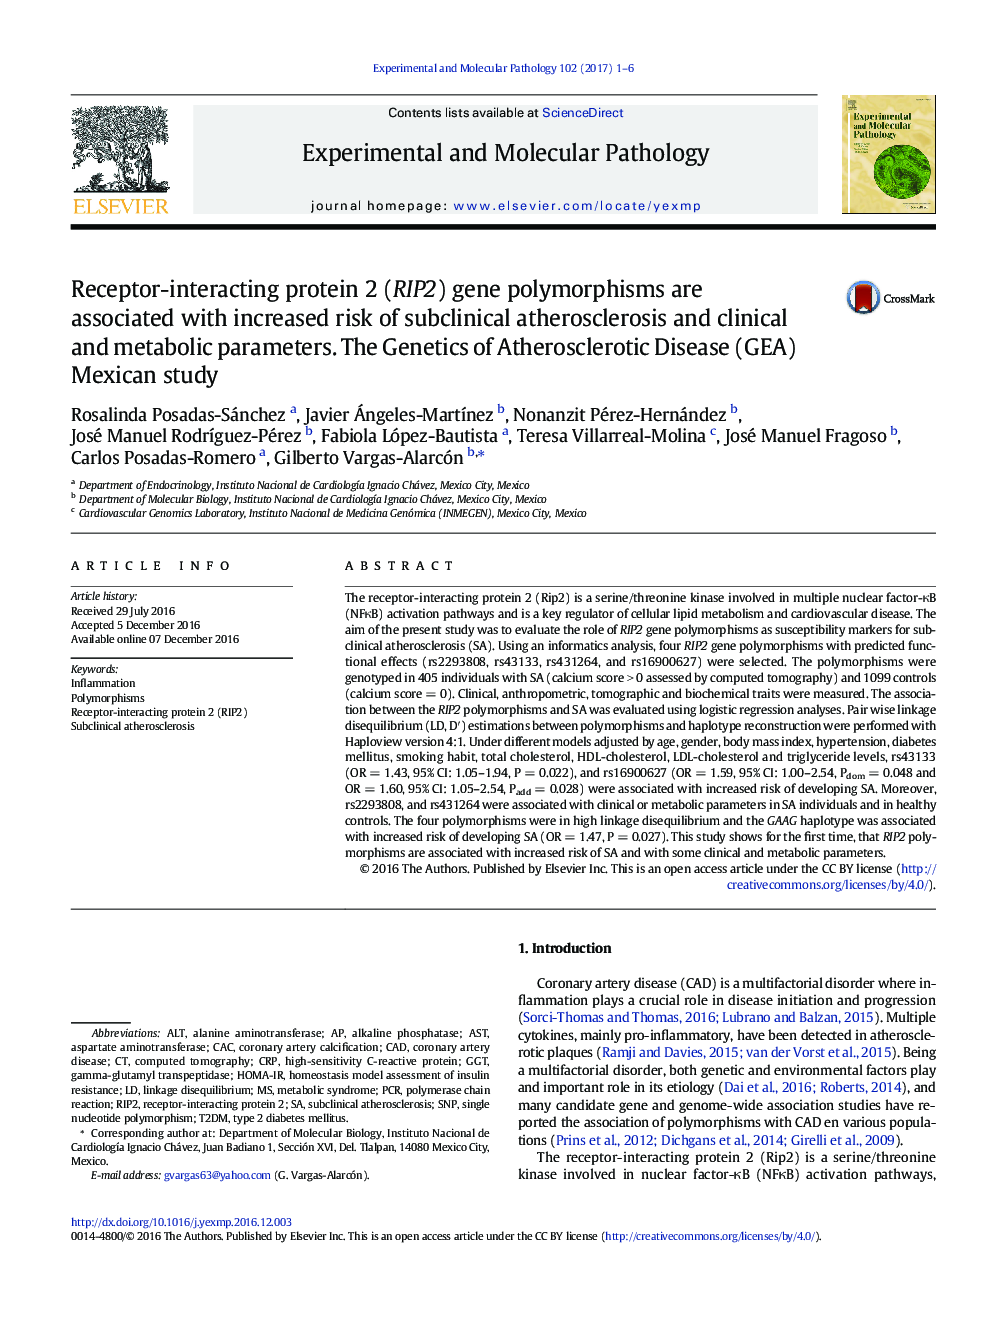 Receptor-interacting protein 2 (RIP2) gene polymorphisms are associated with increased risk of subclinical atherosclerosis and clinical and metabolic parameters. The Genetics of Atherosclerotic Disease (GEA) Mexican study